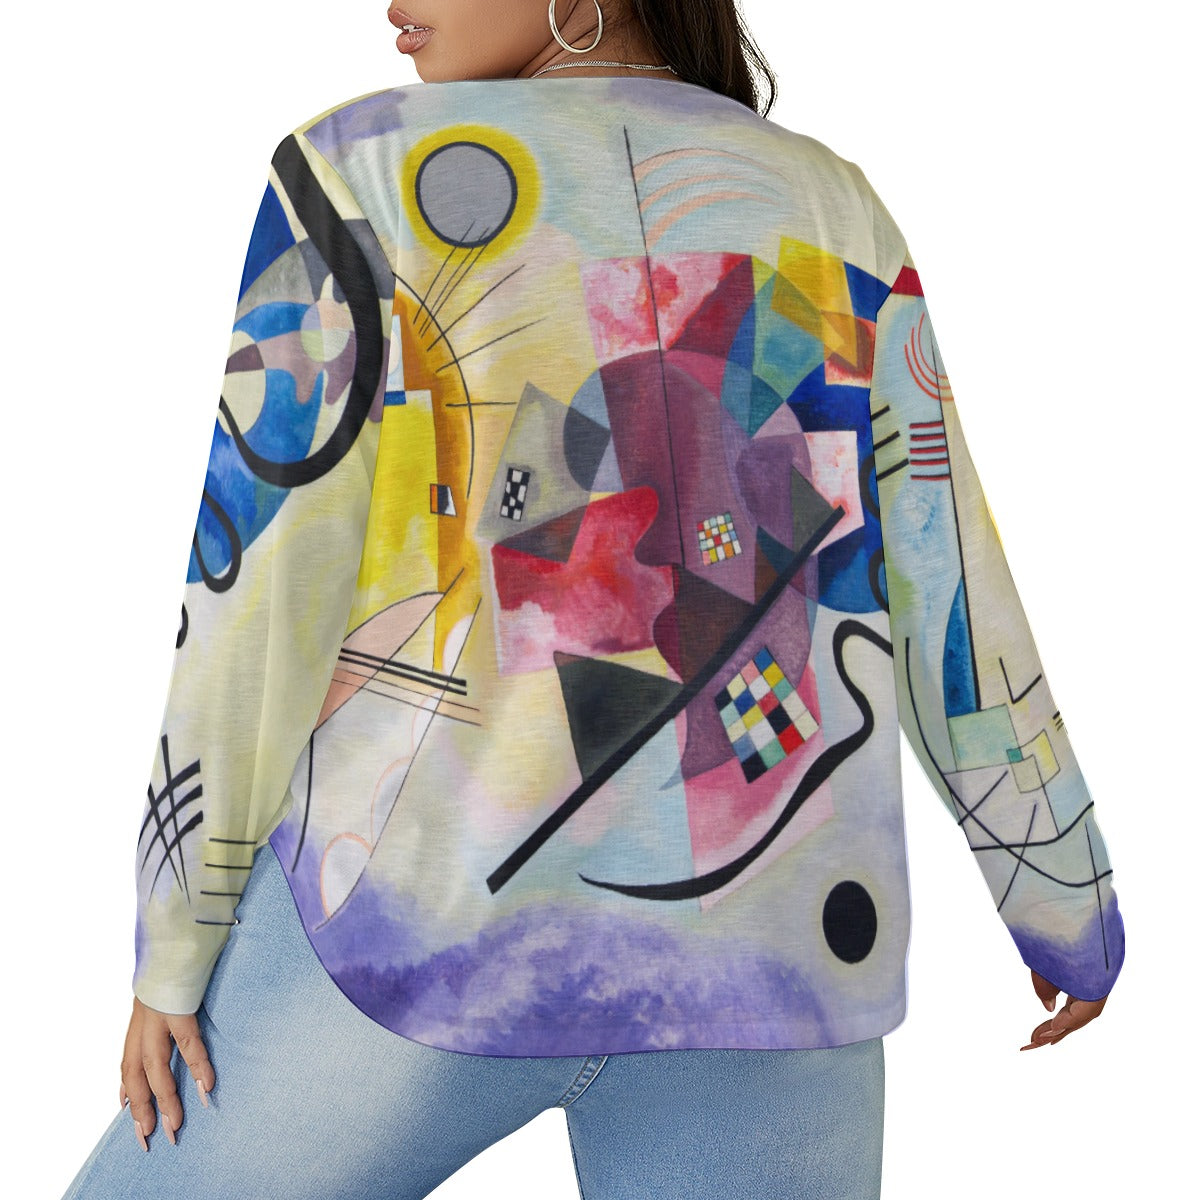 Plus size wearable art with abstract design